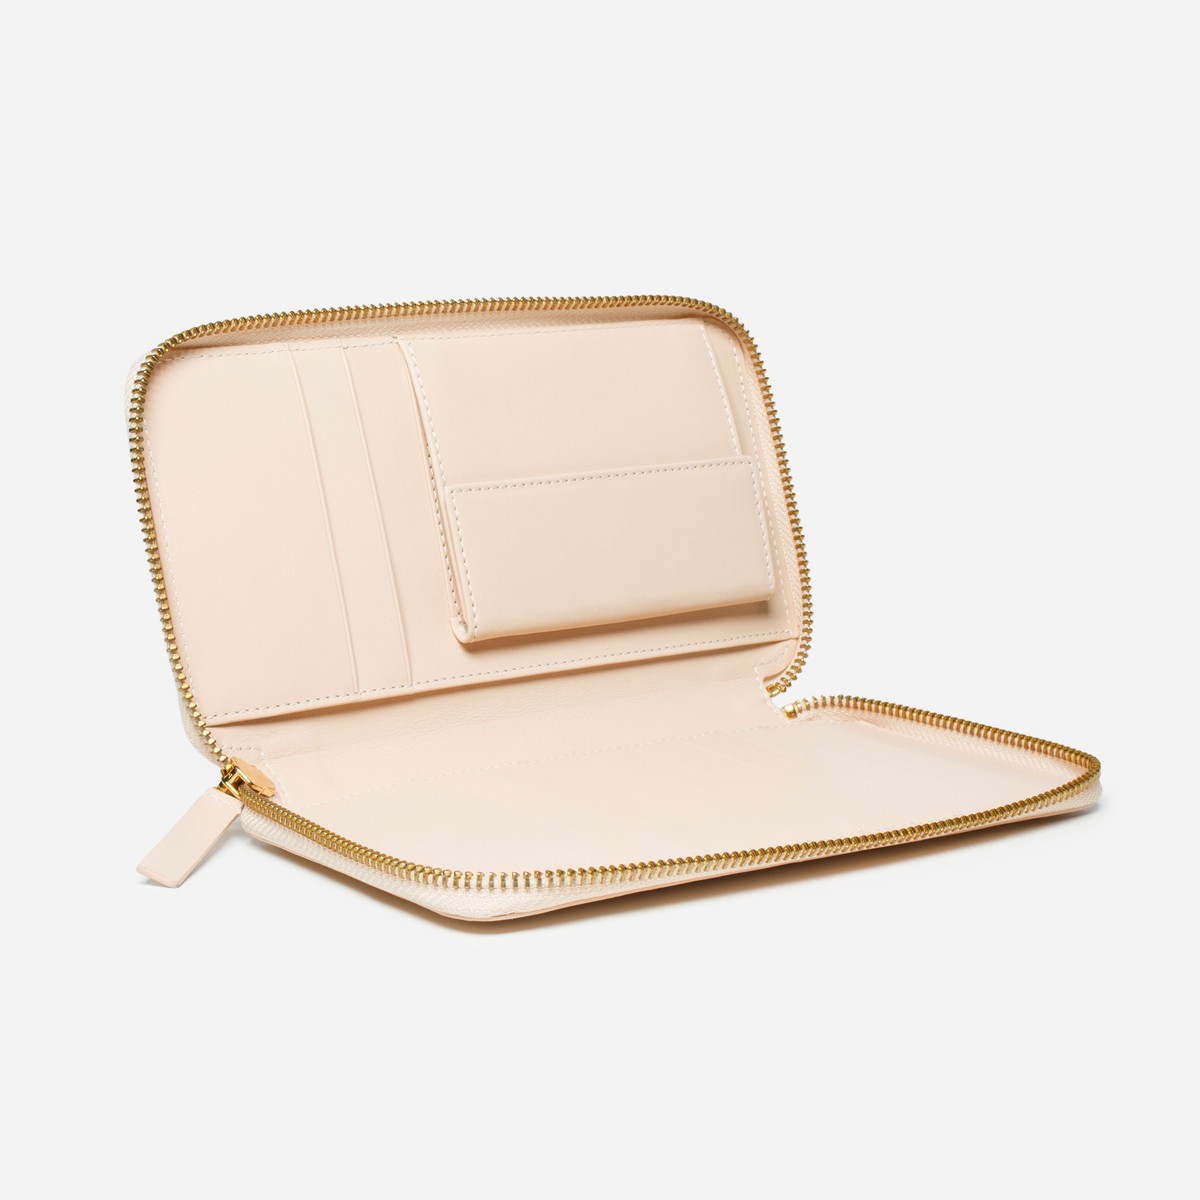 everlane-leather-wallet-7